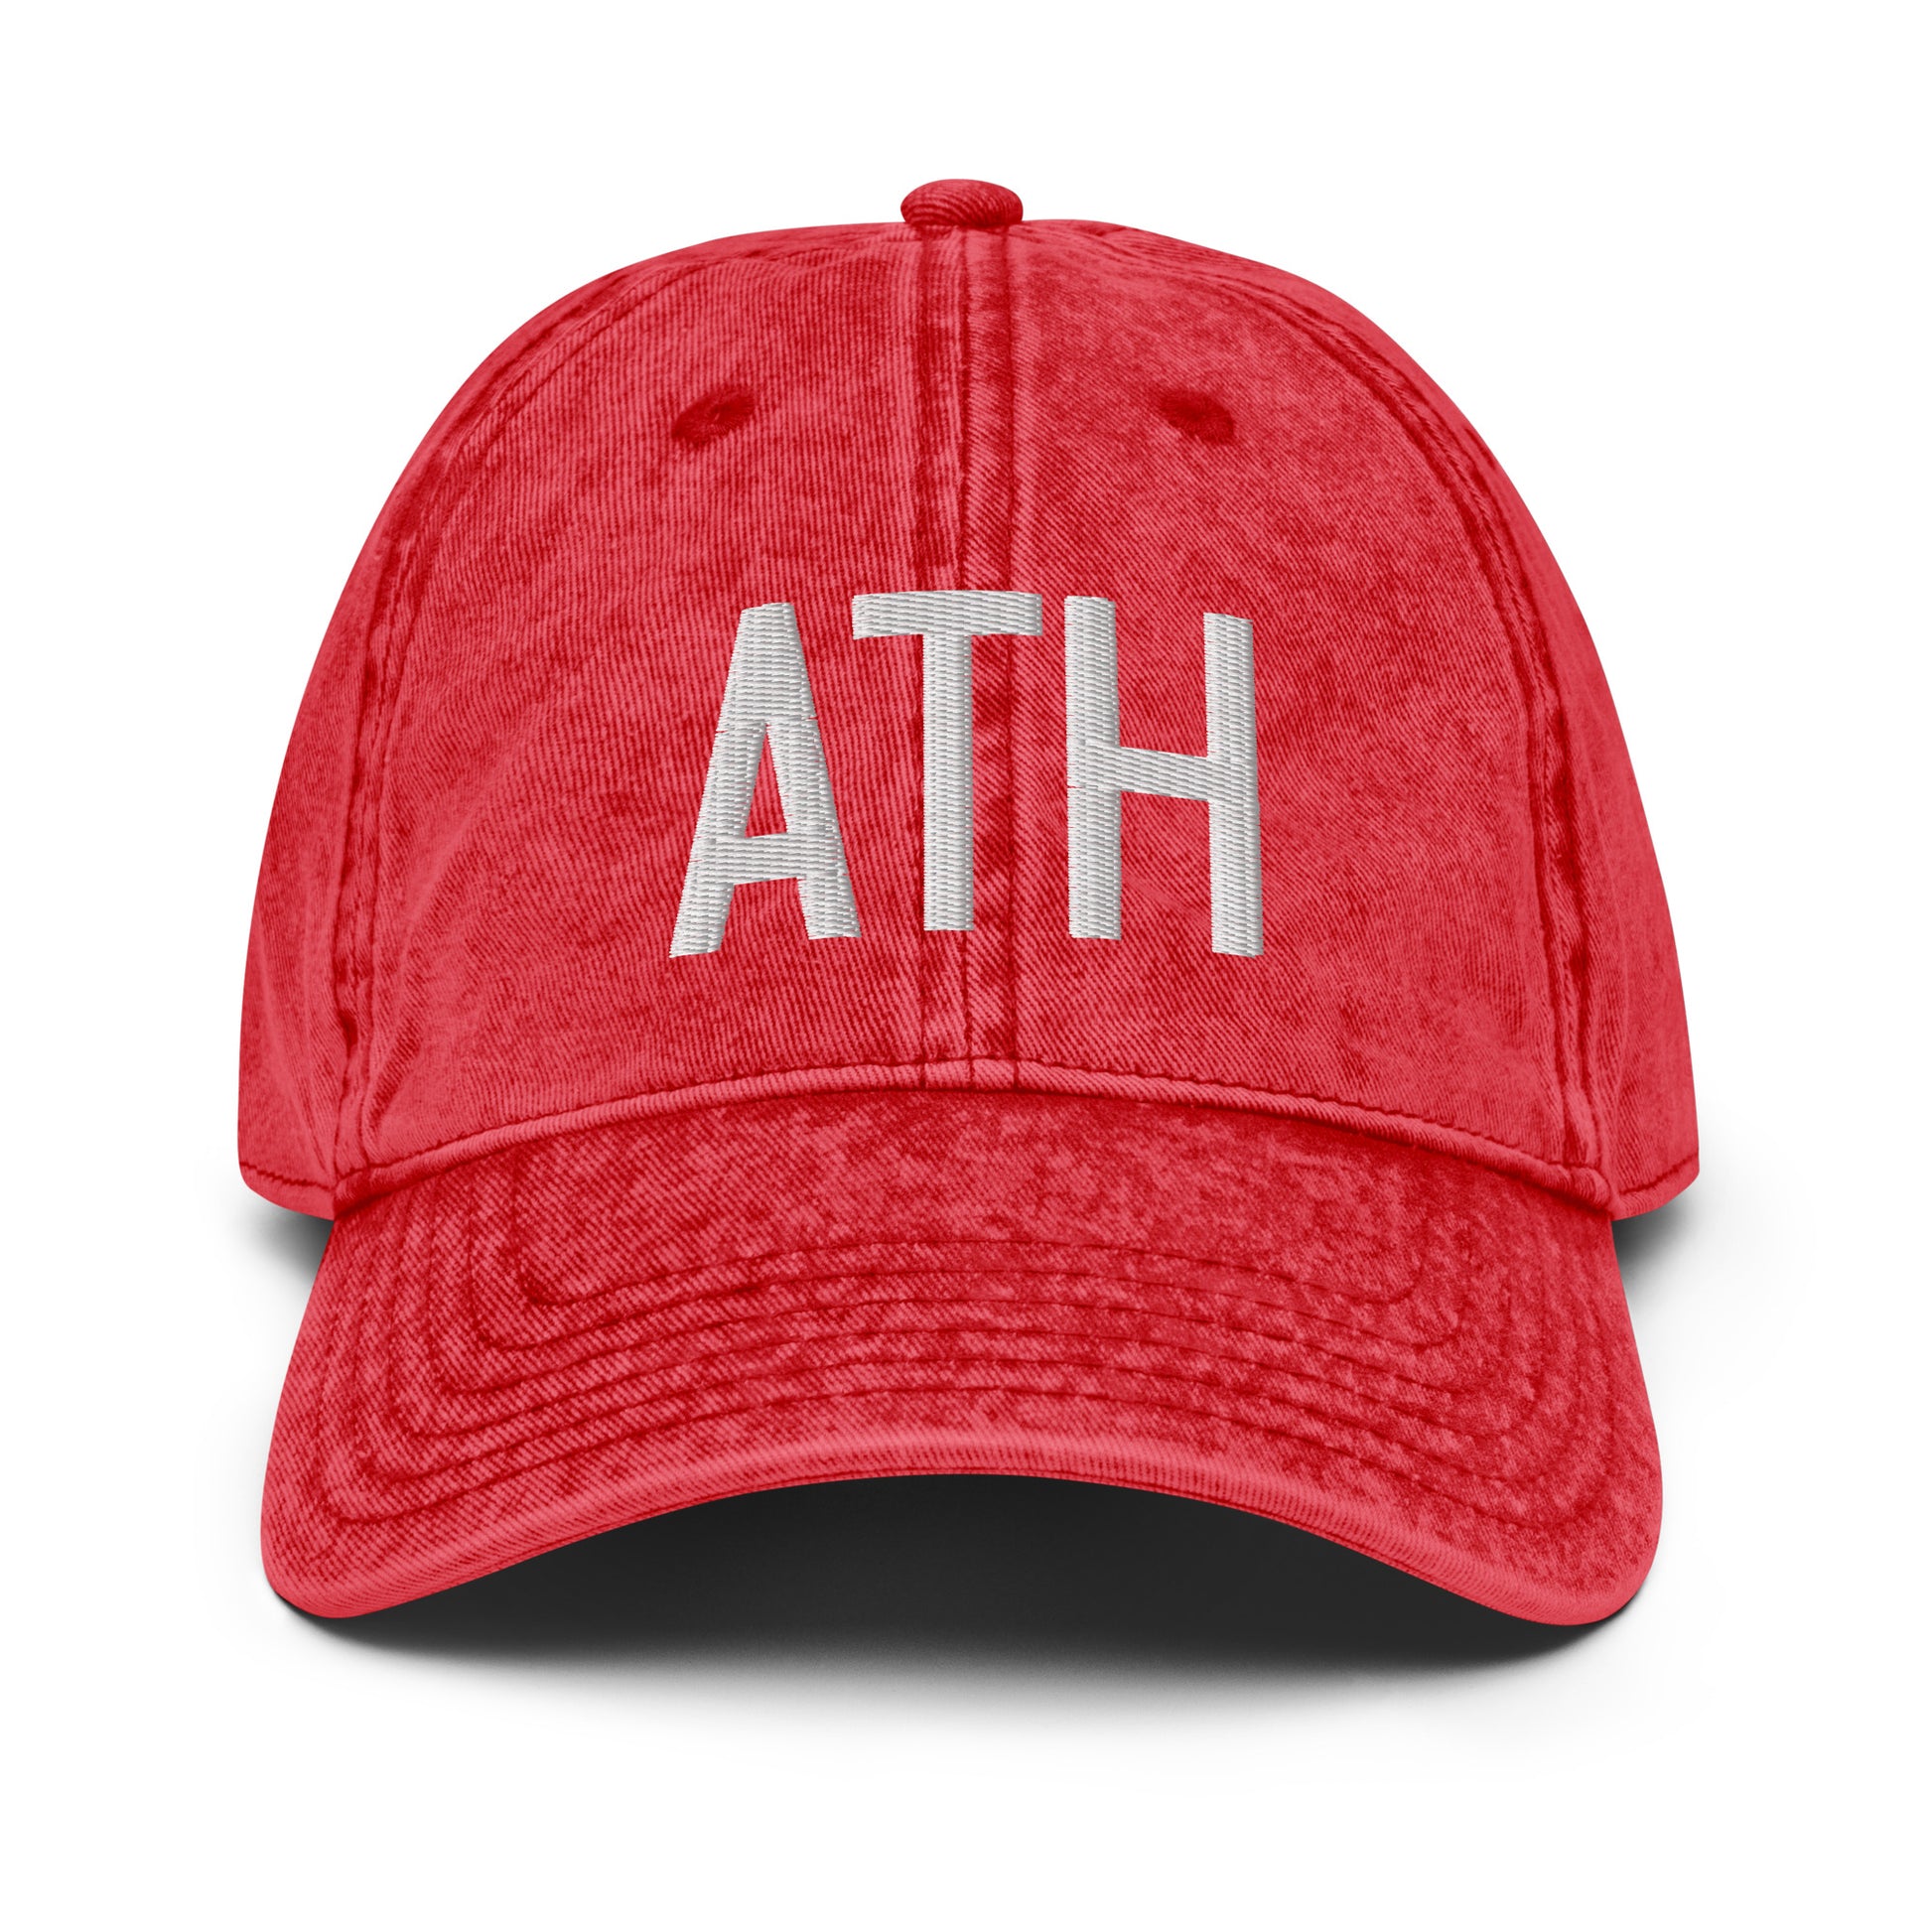 Airport Code Twill Cap - White • ATH Athens • YHM Designs - Image 22